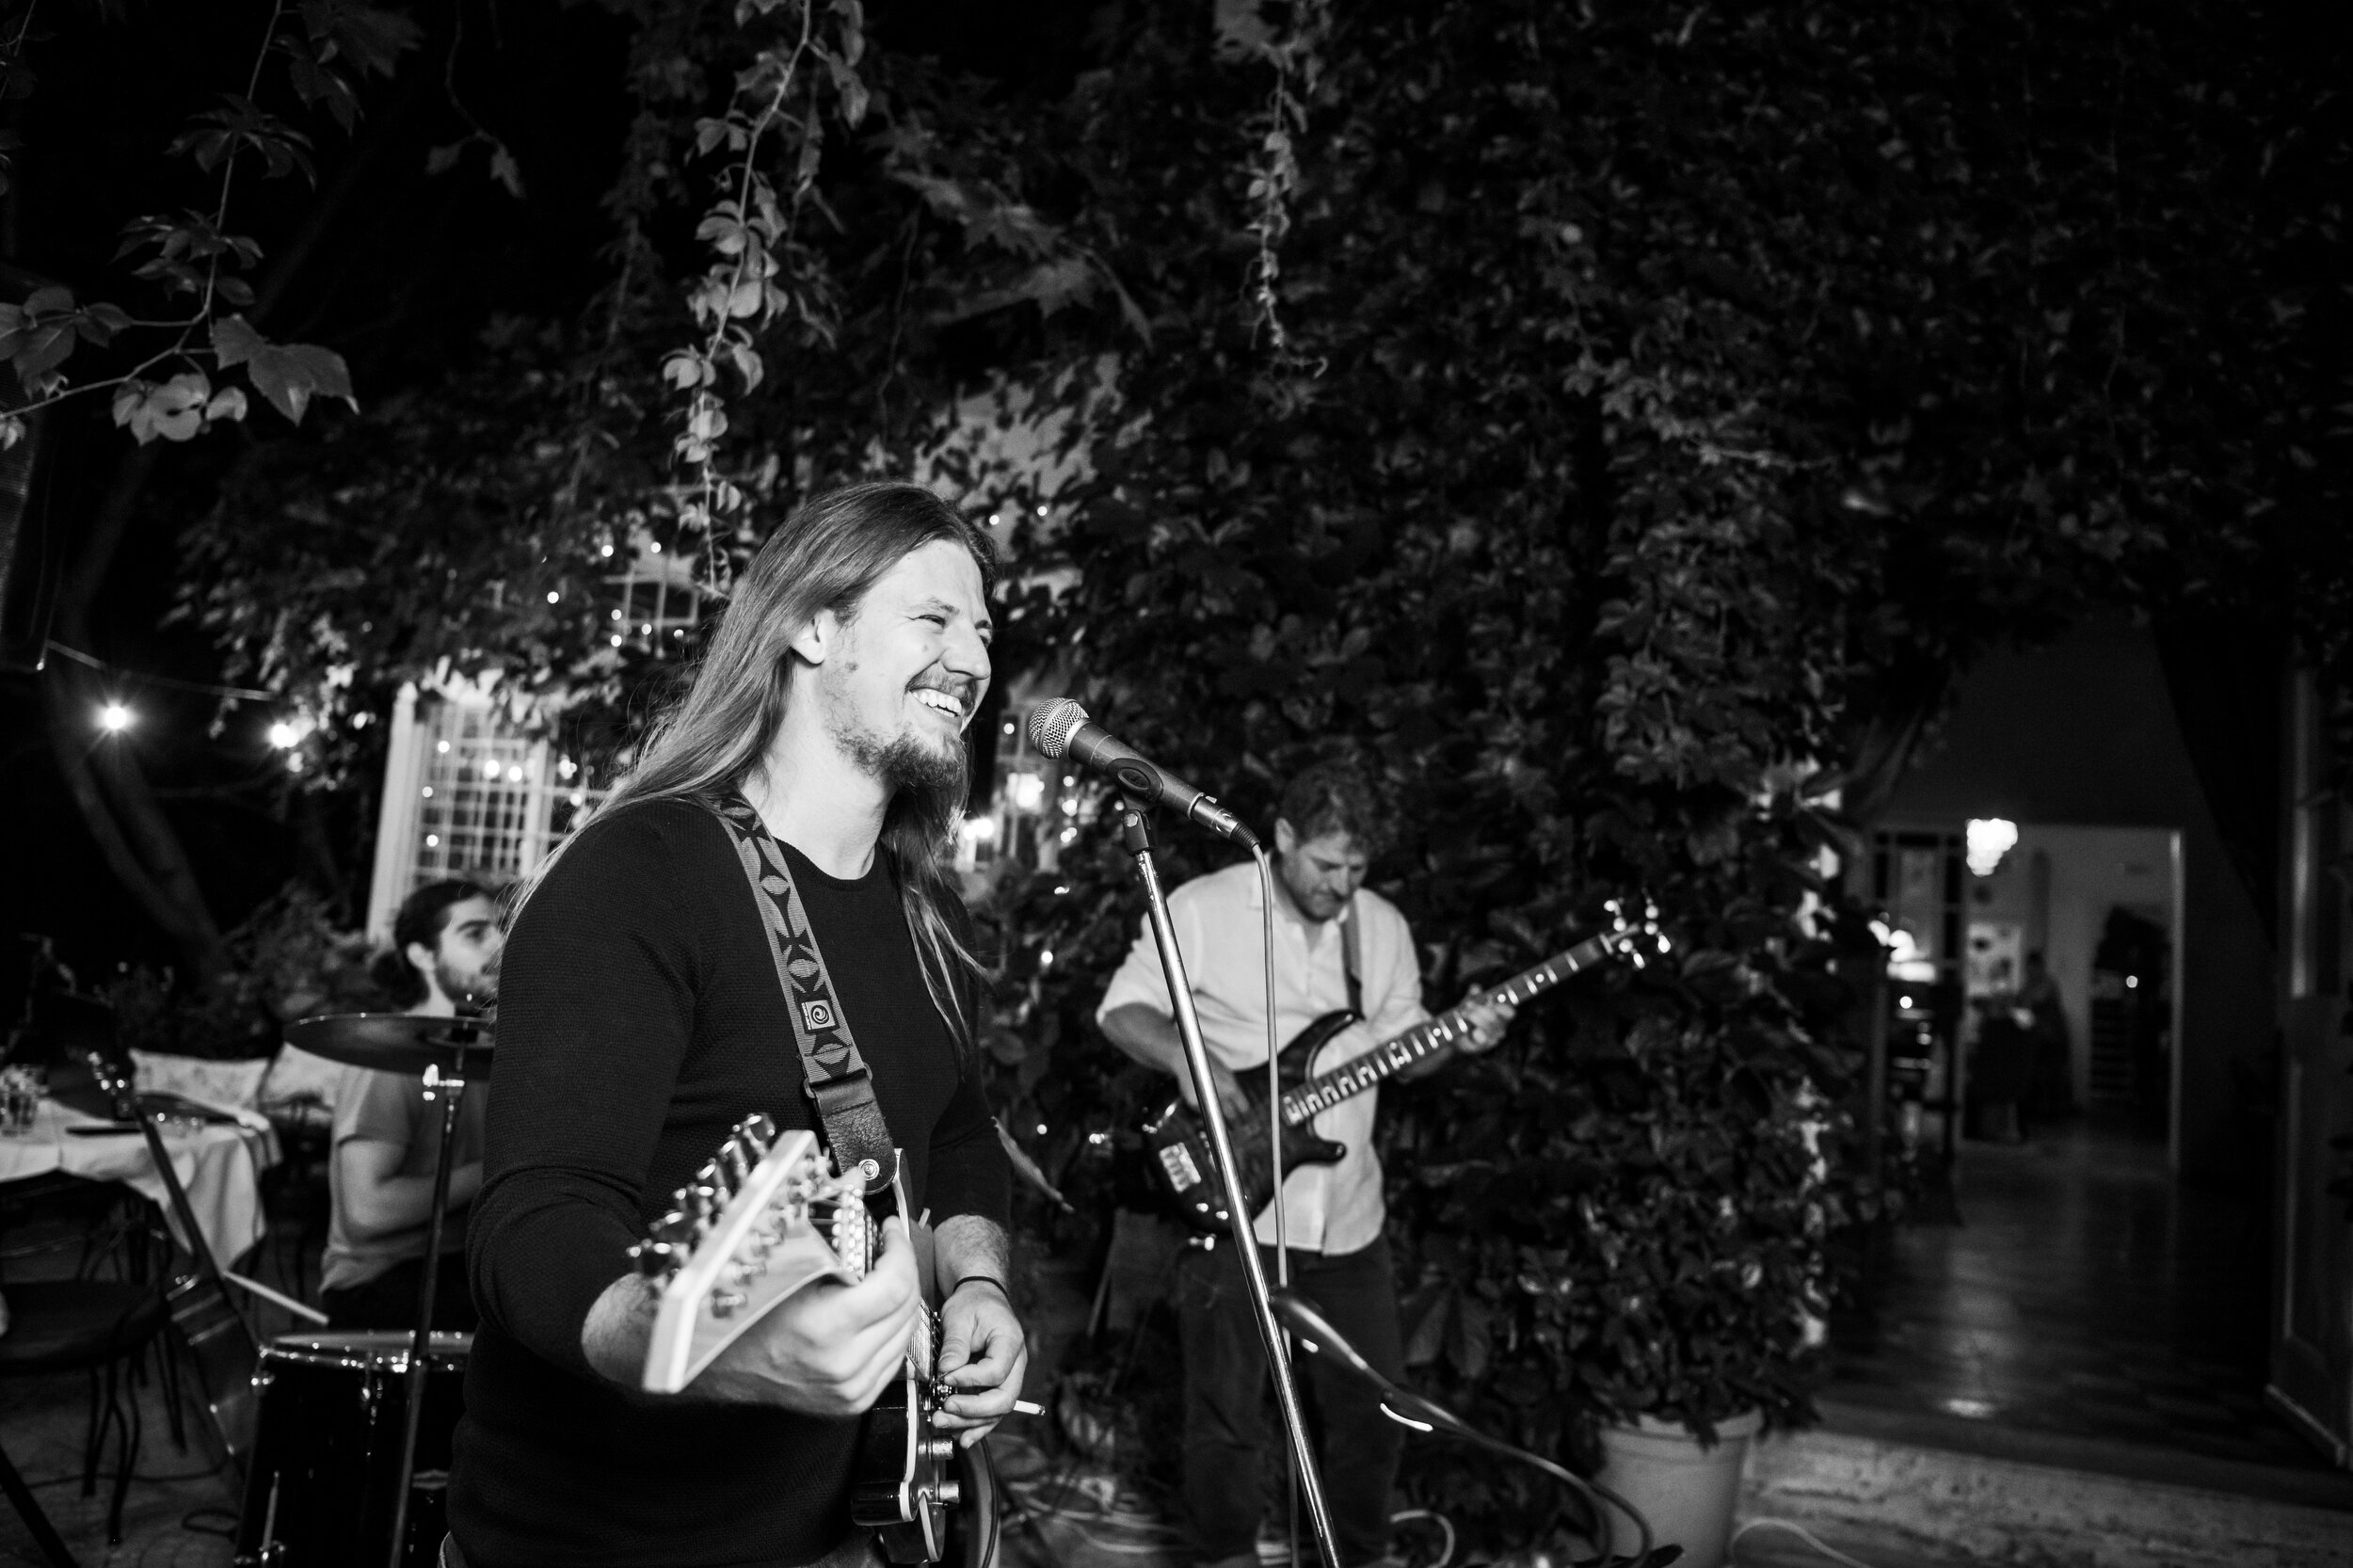 Band plays during an outdoor wedding reception:  destination wedding photo at the Lost Unicorn Hotel, Tsagarada, Greece by J. Brown Photography.